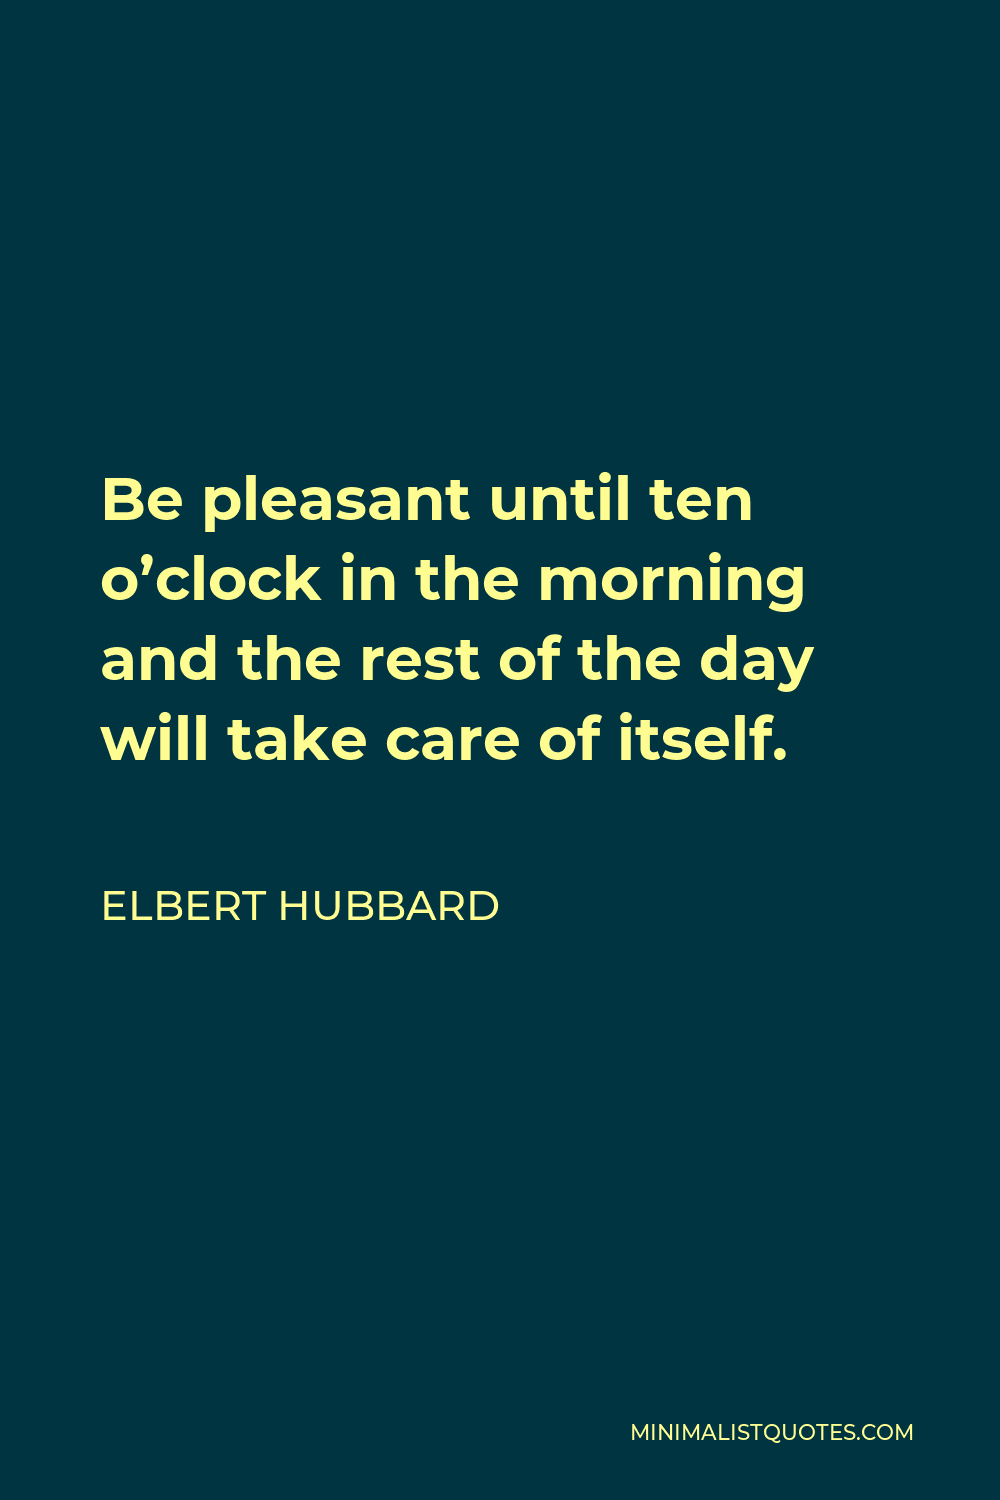 Elbert Hubbard Quote - Be pleasant until ten o’clock in the morning and the rest of the day will take care of itself.